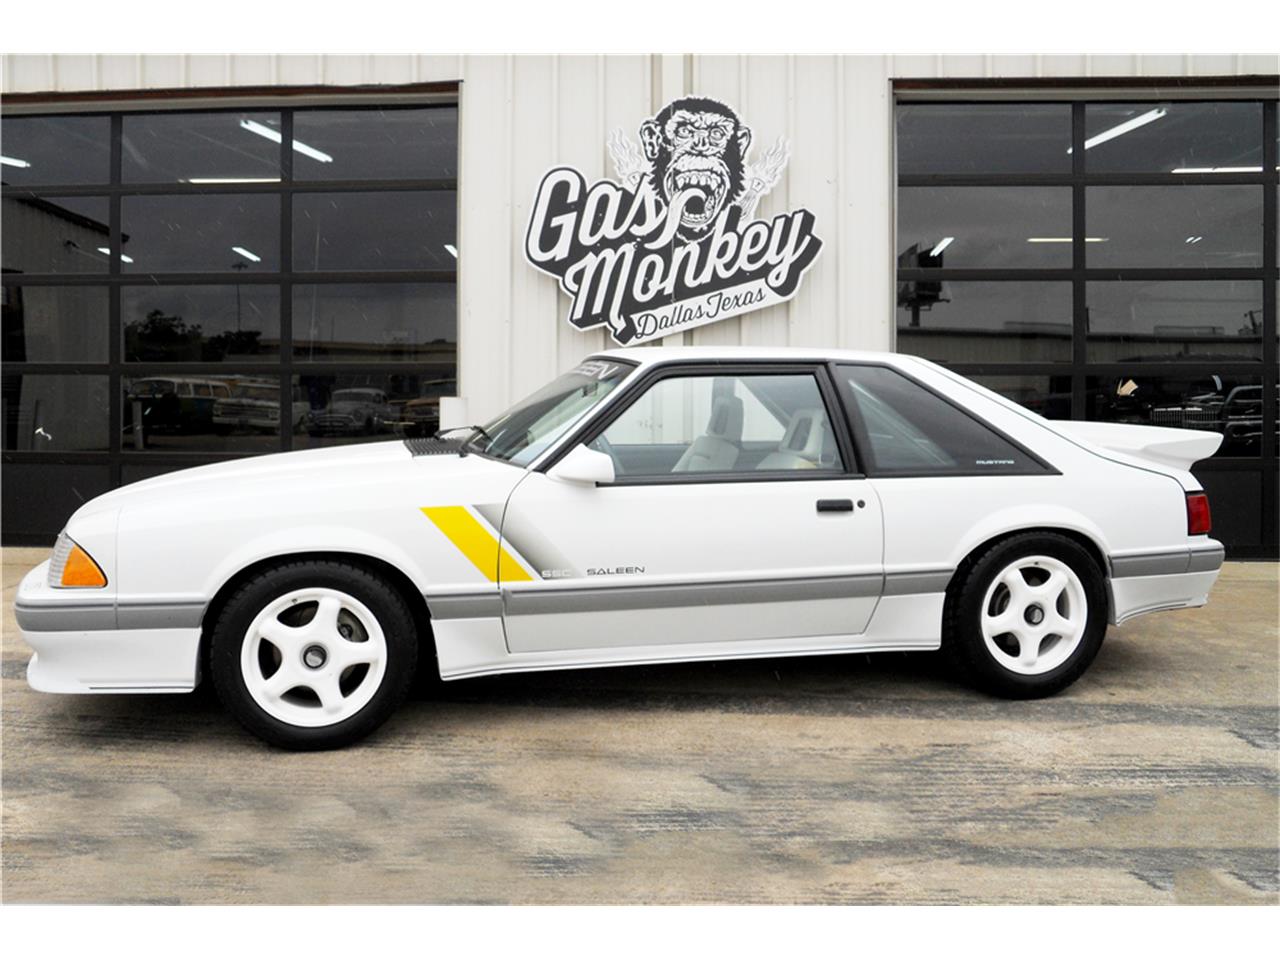 1989 Mustang Gt For Sale In California